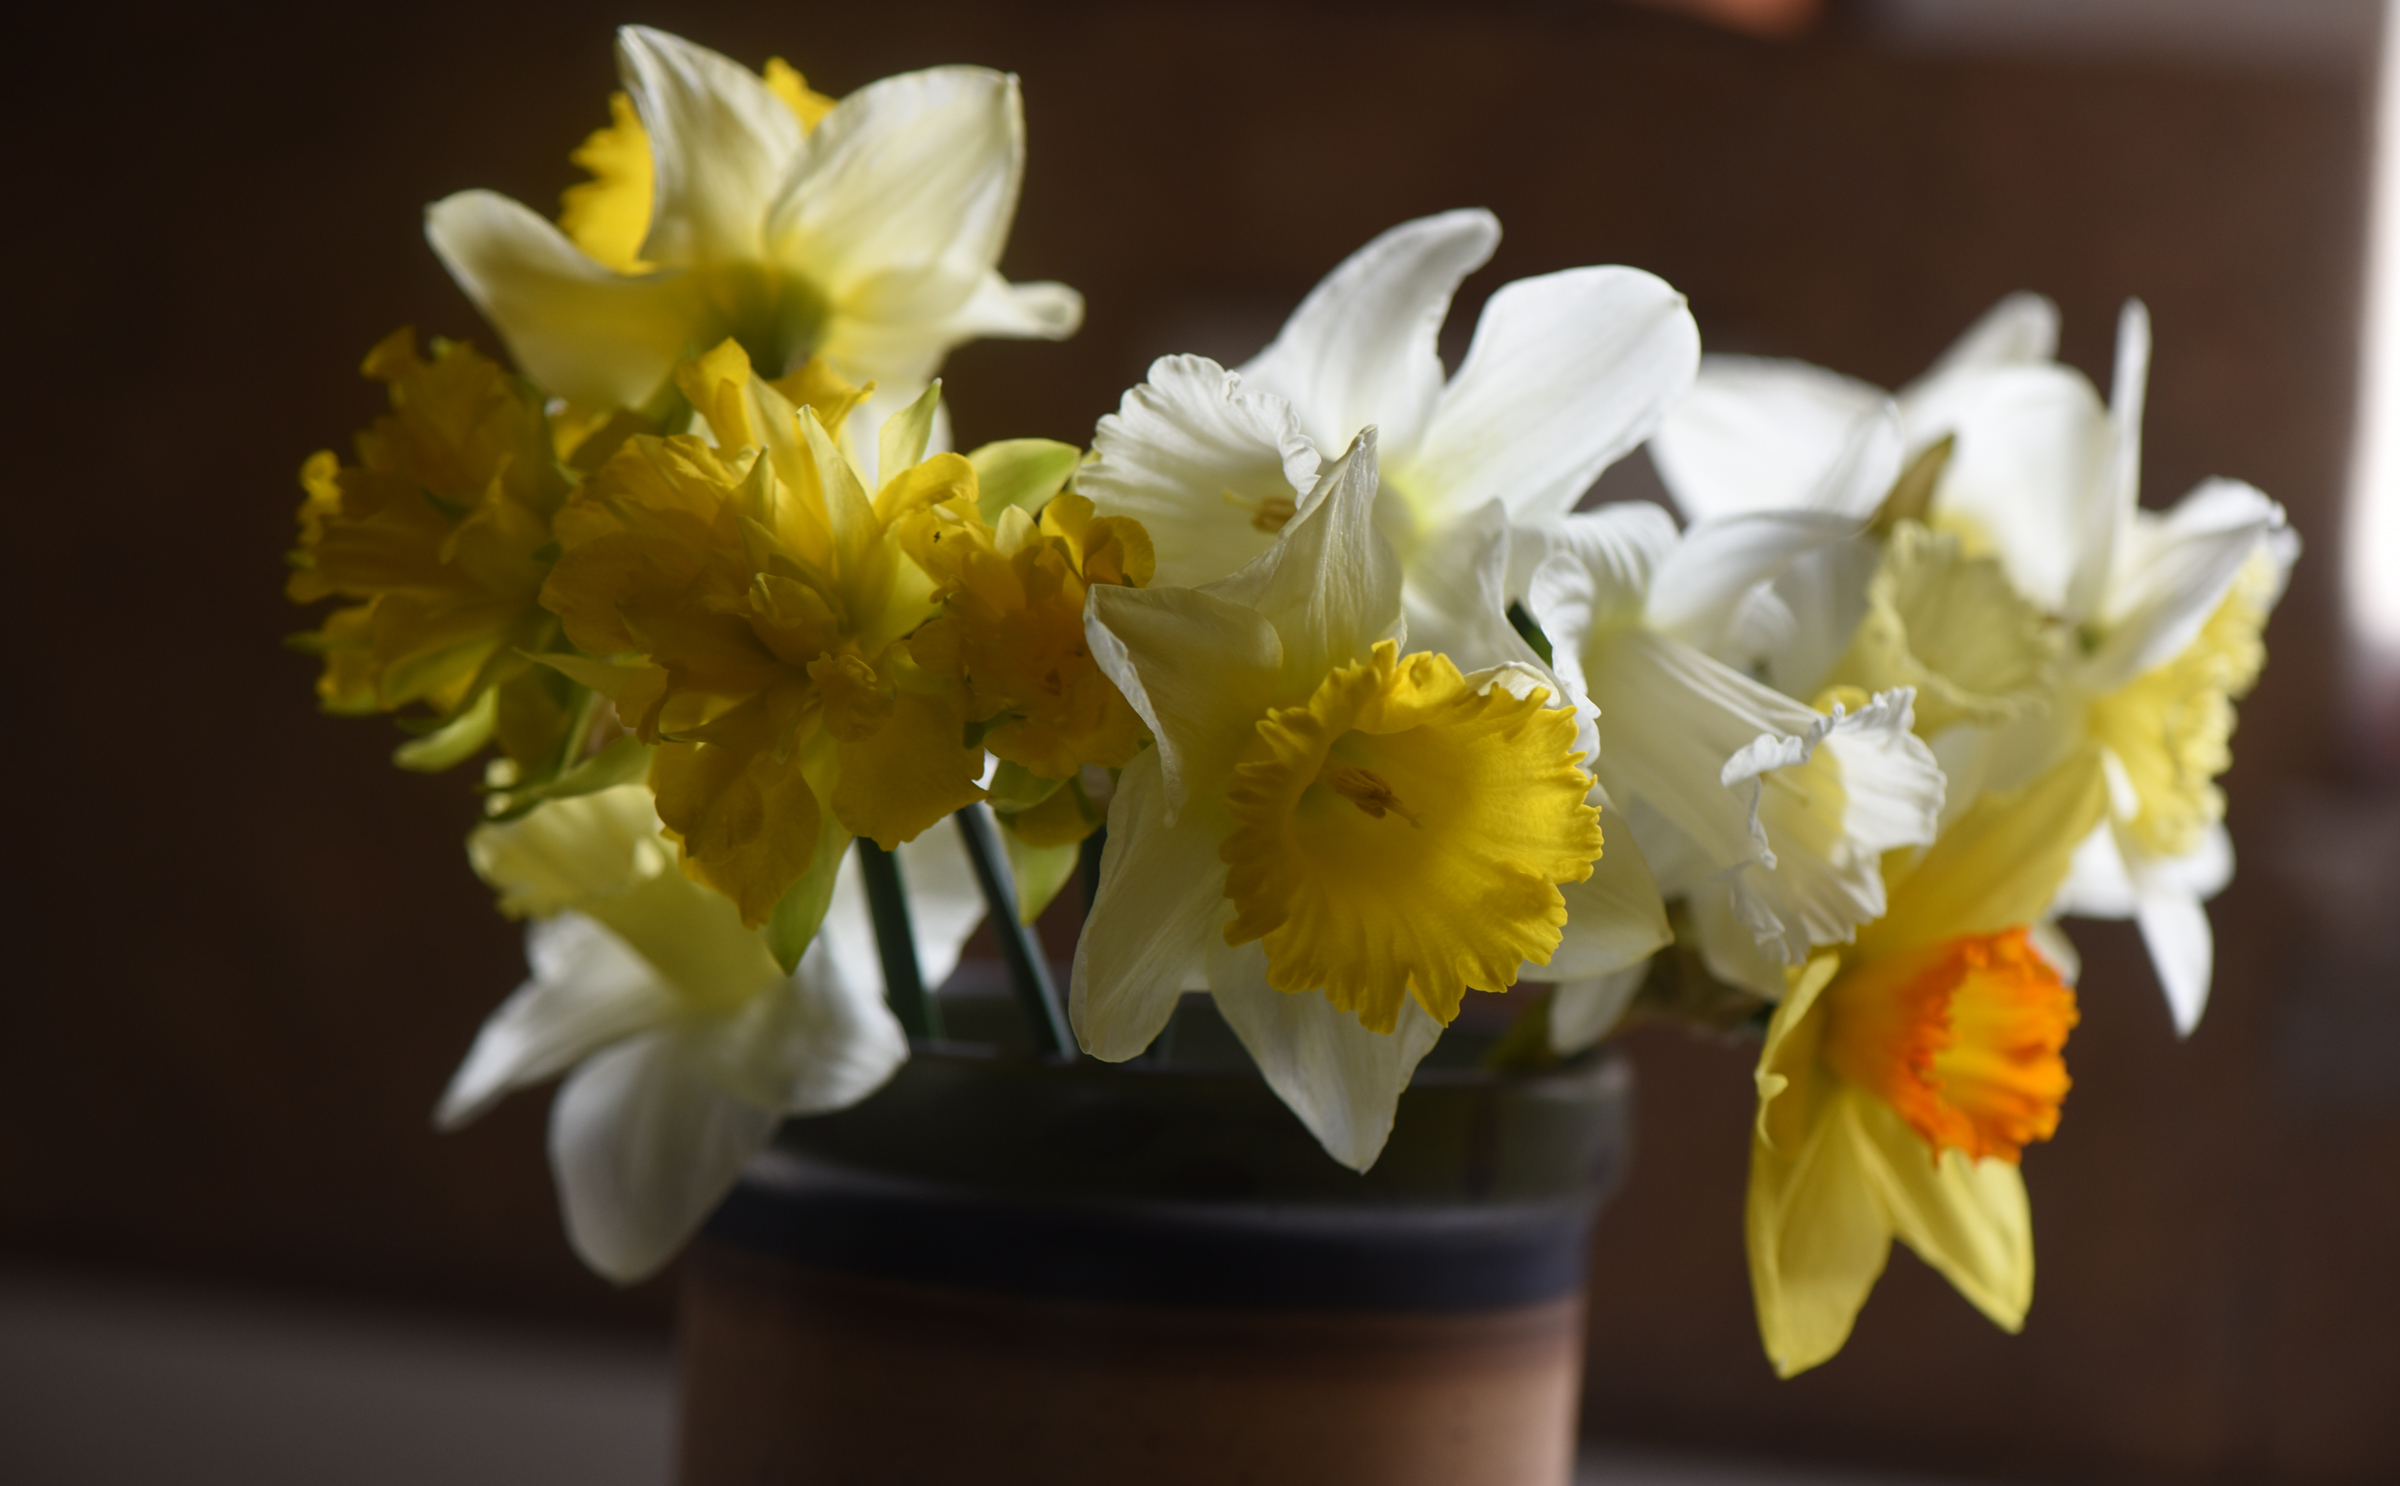 In Doug’s Garden: Making Daffodils Last in Your Home